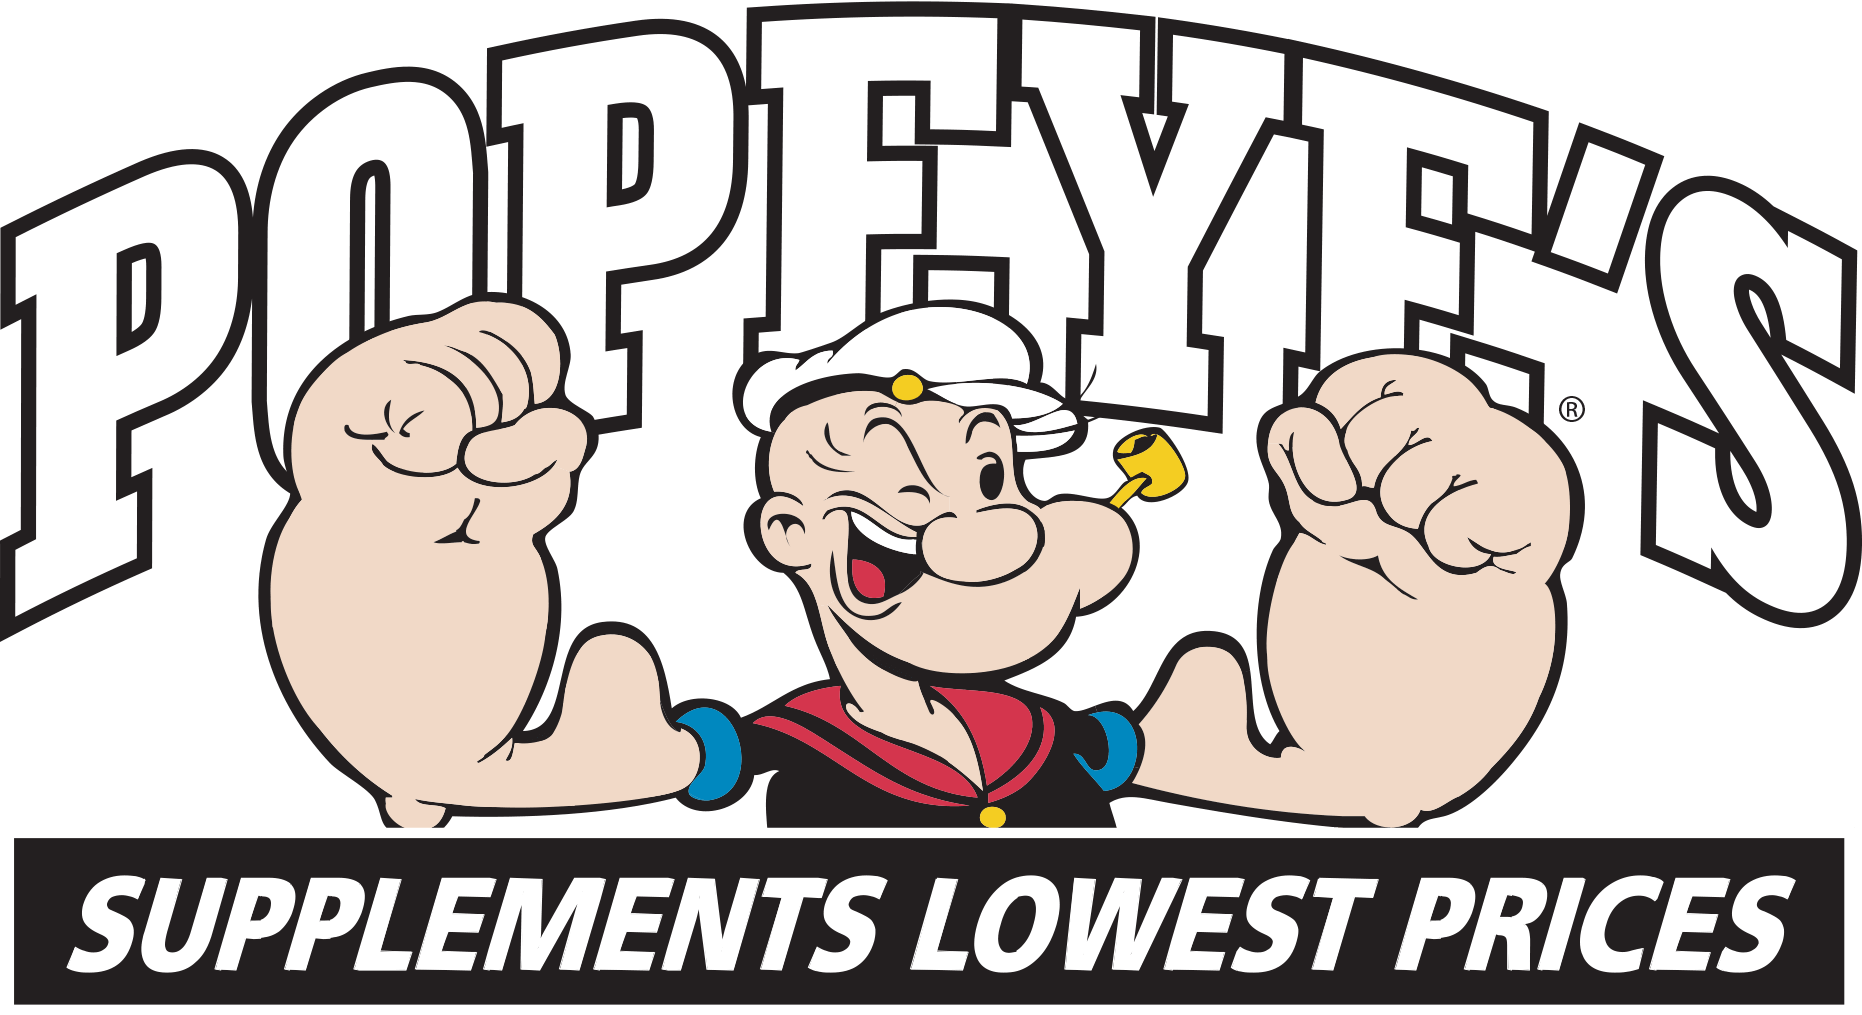 Popeyes Logo Png Know Your Meme Simplybe The Best Porn Website